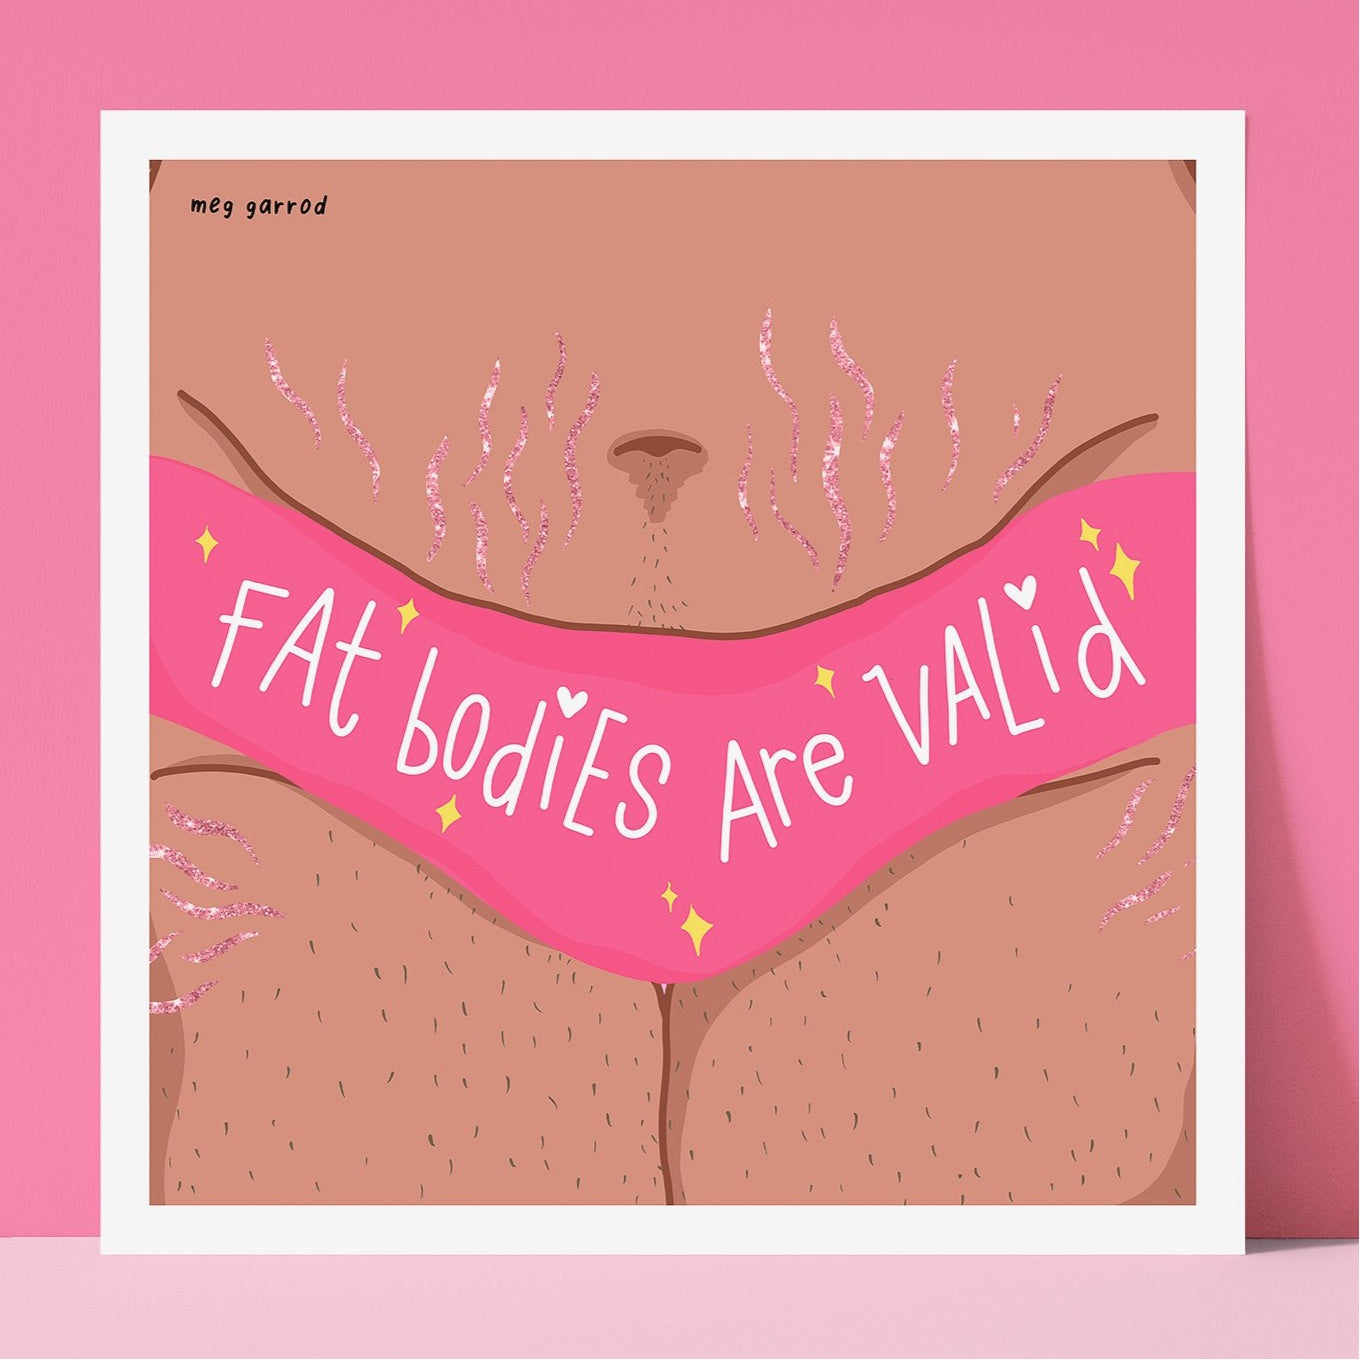 Fat Bodies are Valid Print